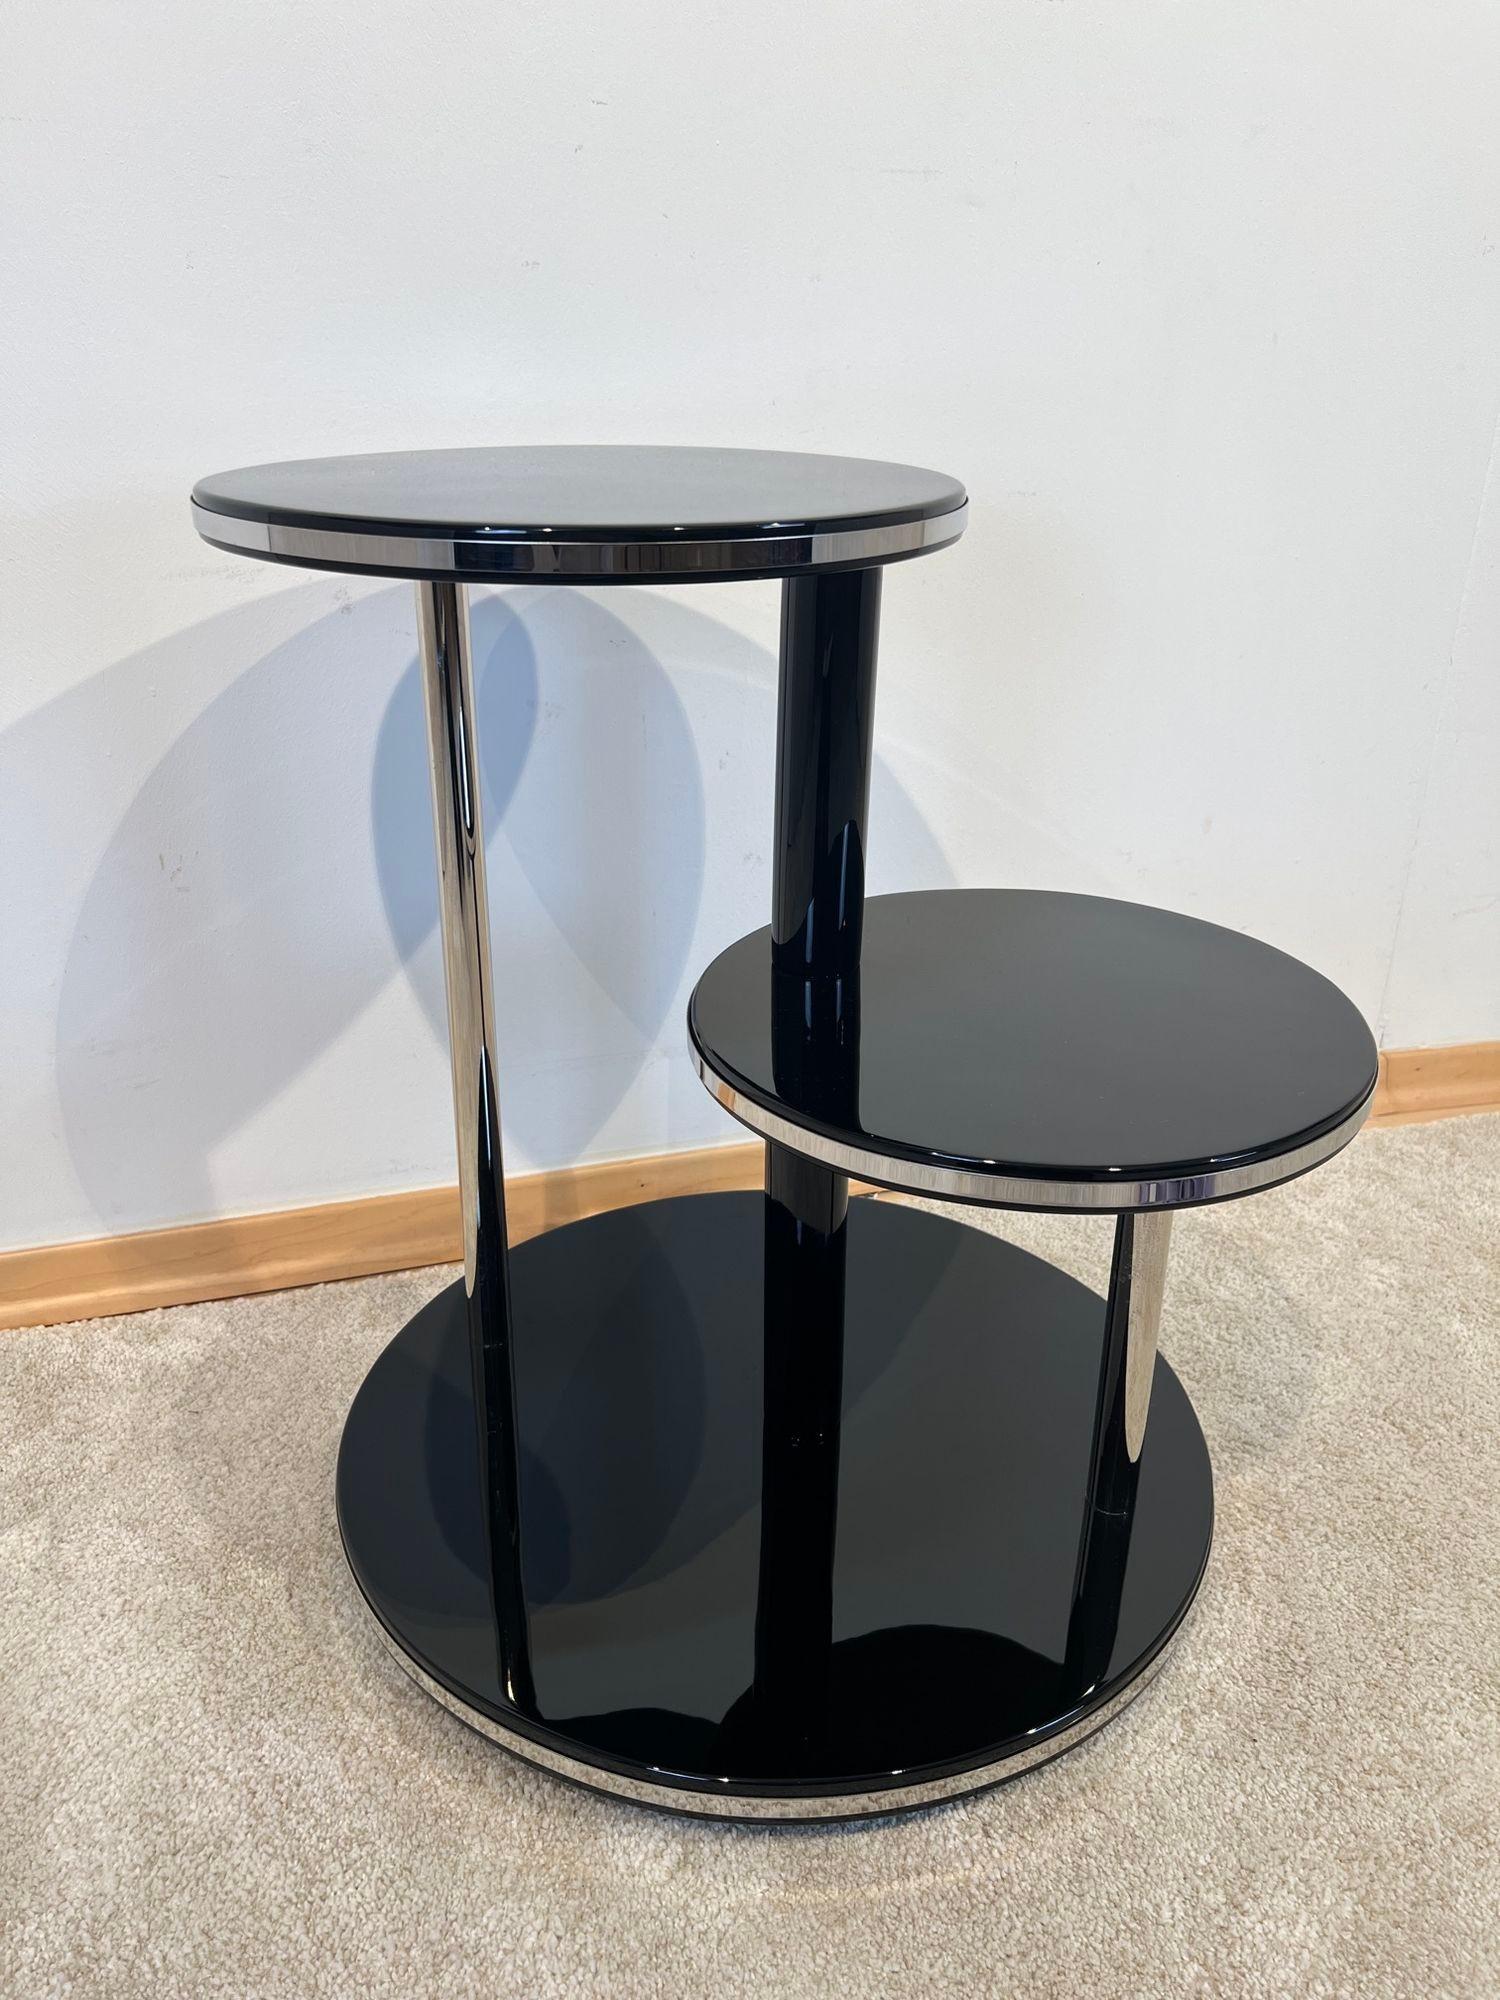 Art Deco Round Side Table, Black Lacquer, Chrome, Metal Trims, France circa 1930 For Sale 9